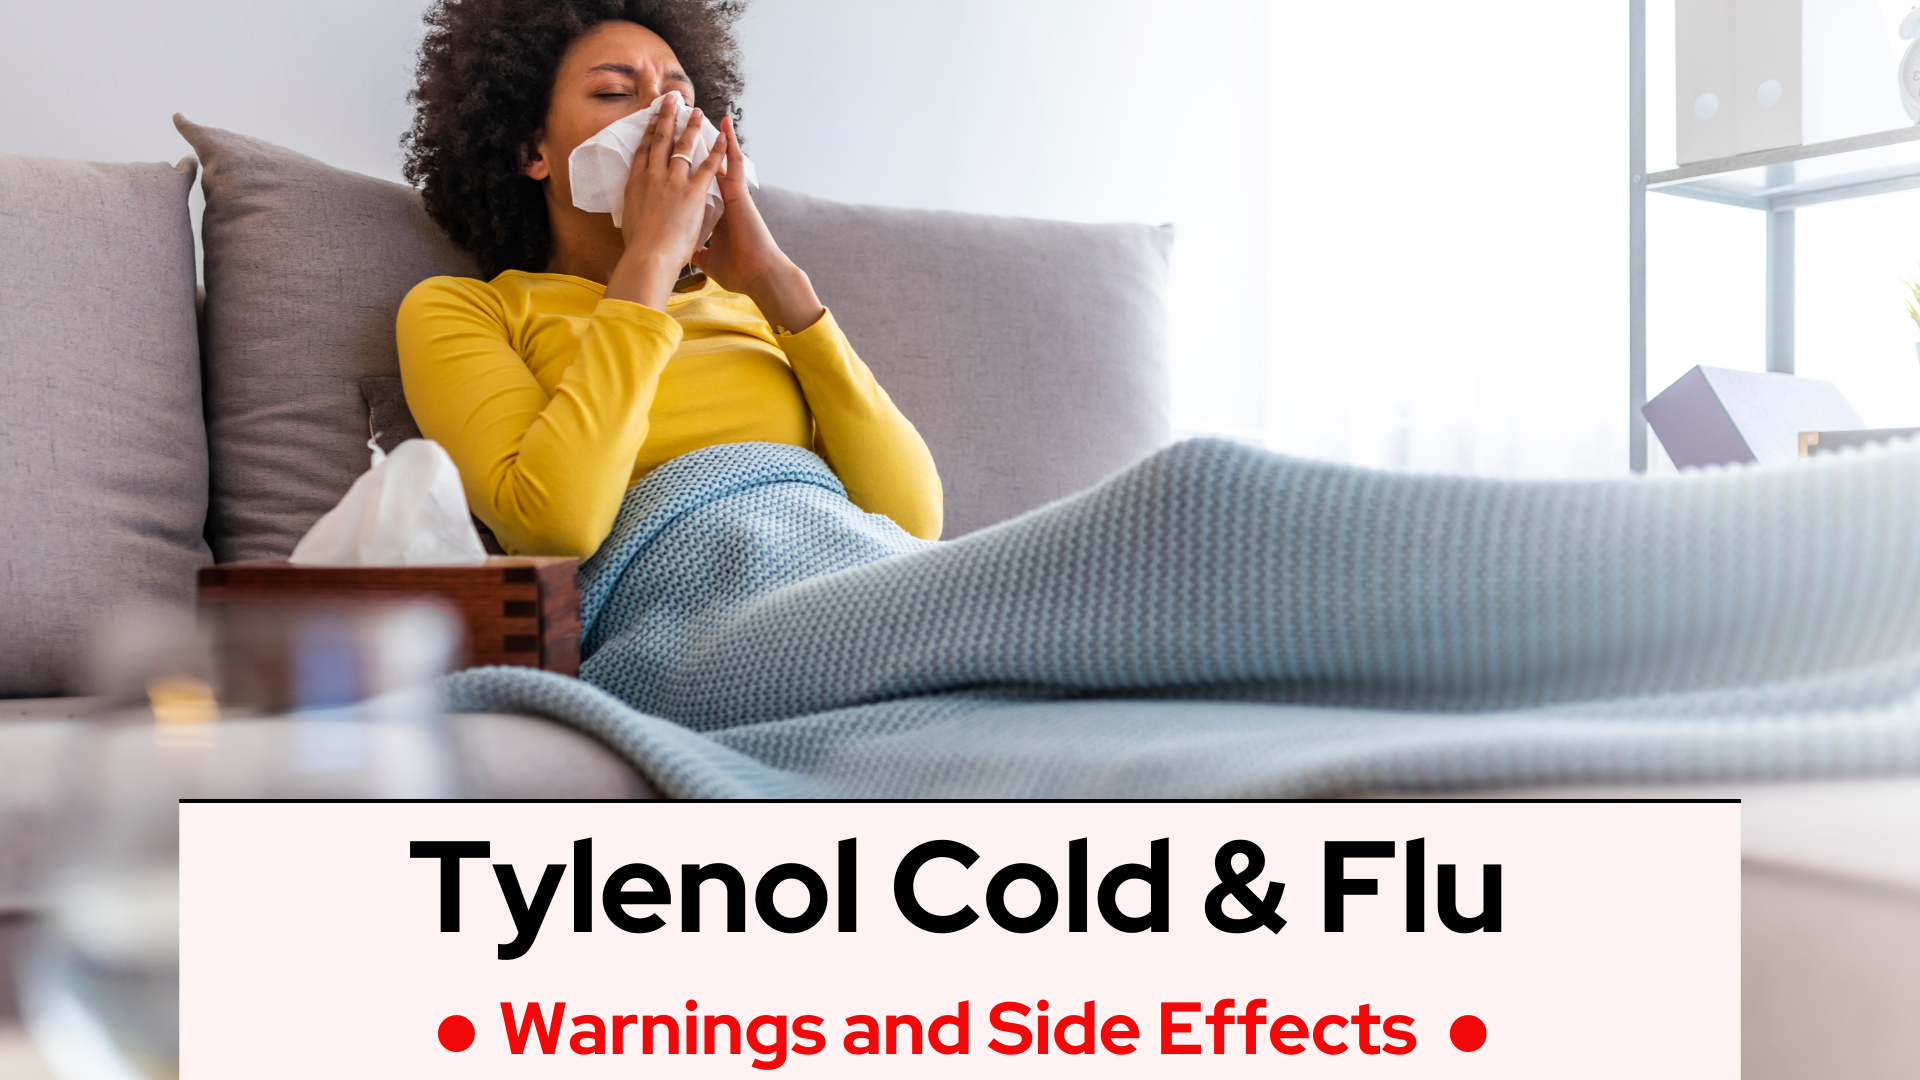 Tylenol Cold & Flu: Warnings and Side Effects